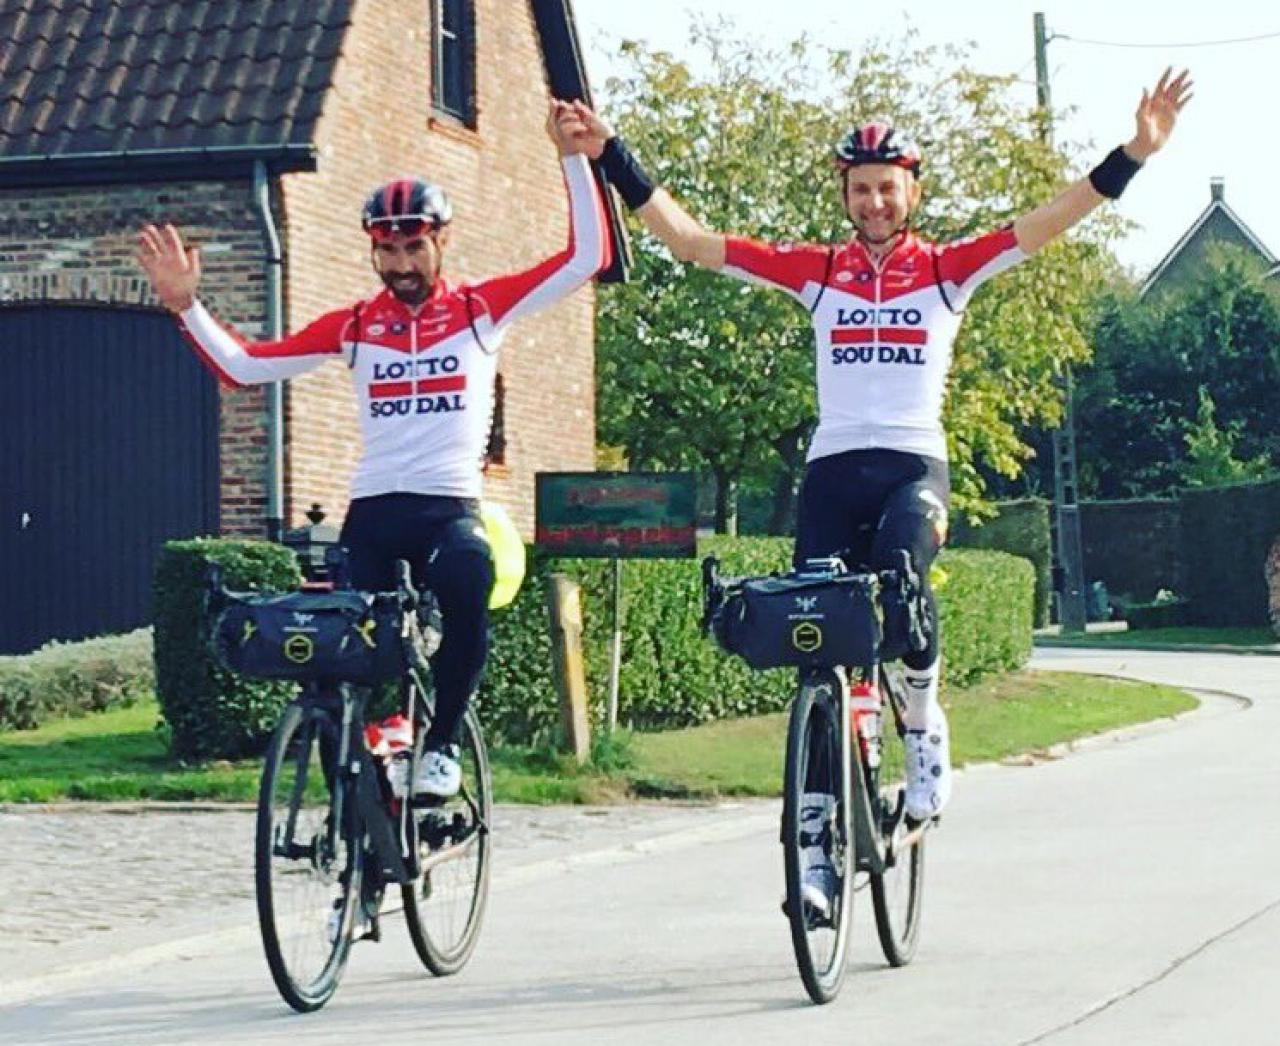 Thomas De Gendt and Tim finish bikepacking trip home from Il Lombardia | road.cc